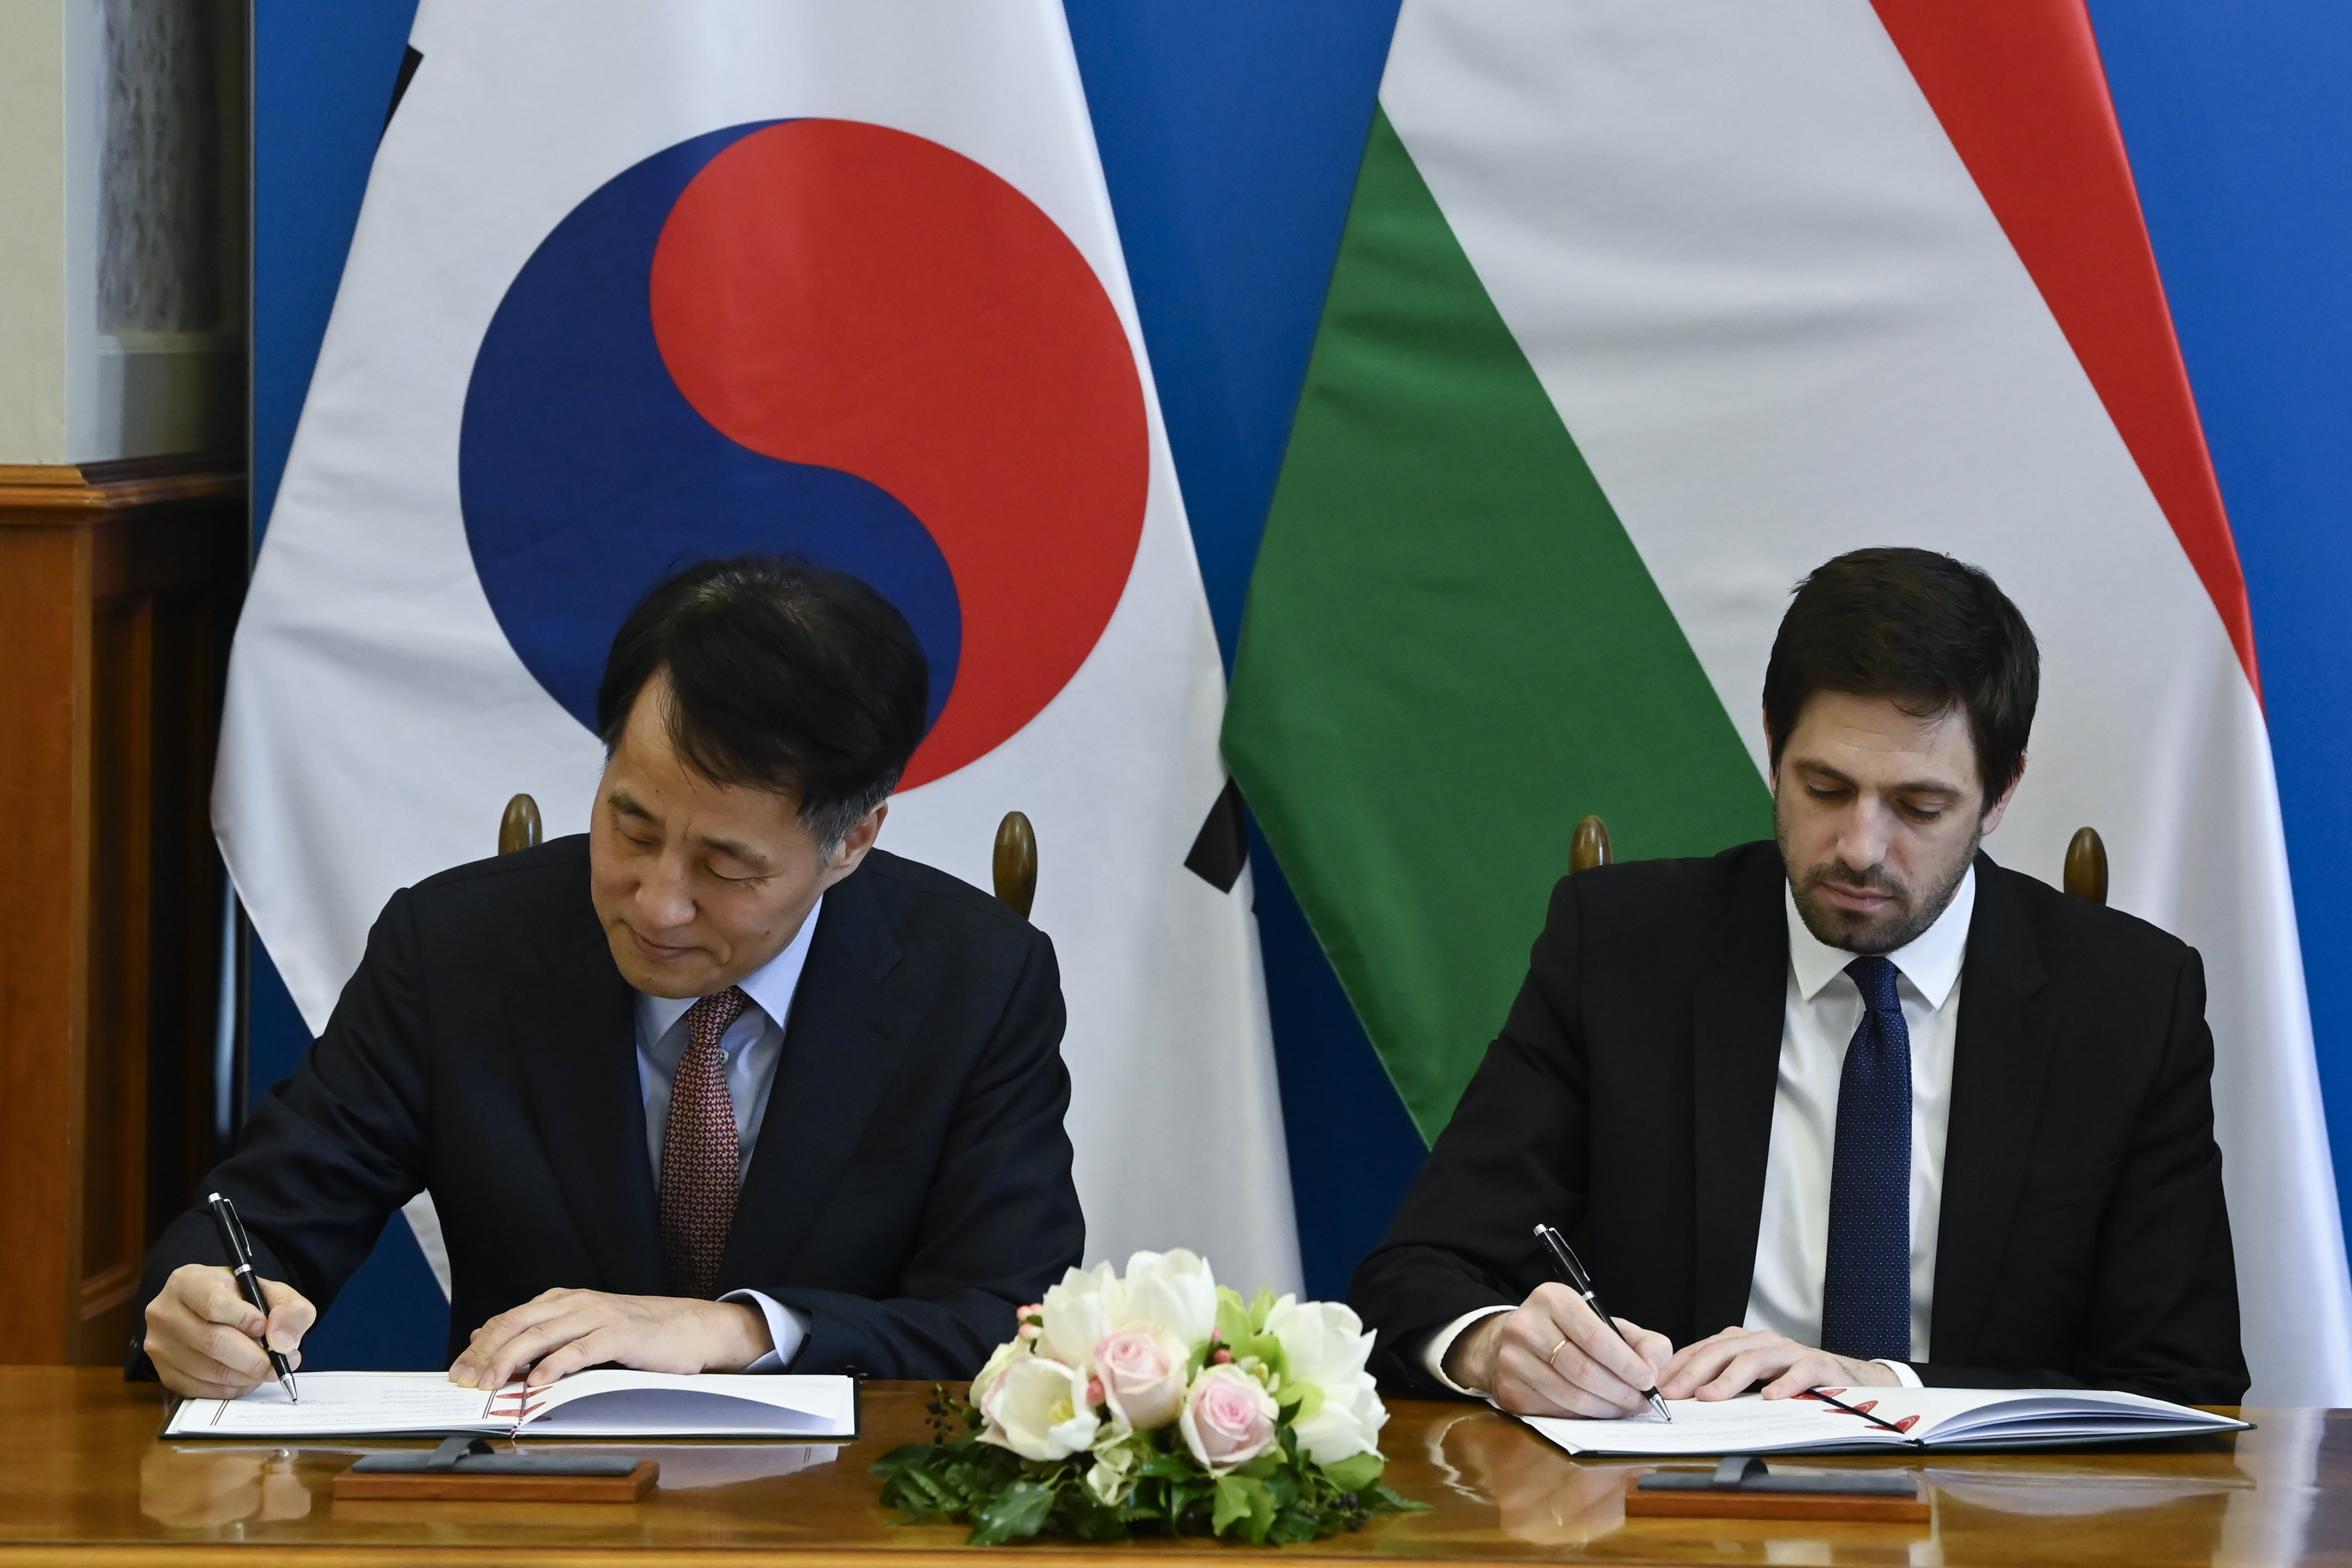 Hungary, South Korea Sign MoU Promoting Trade, Investment